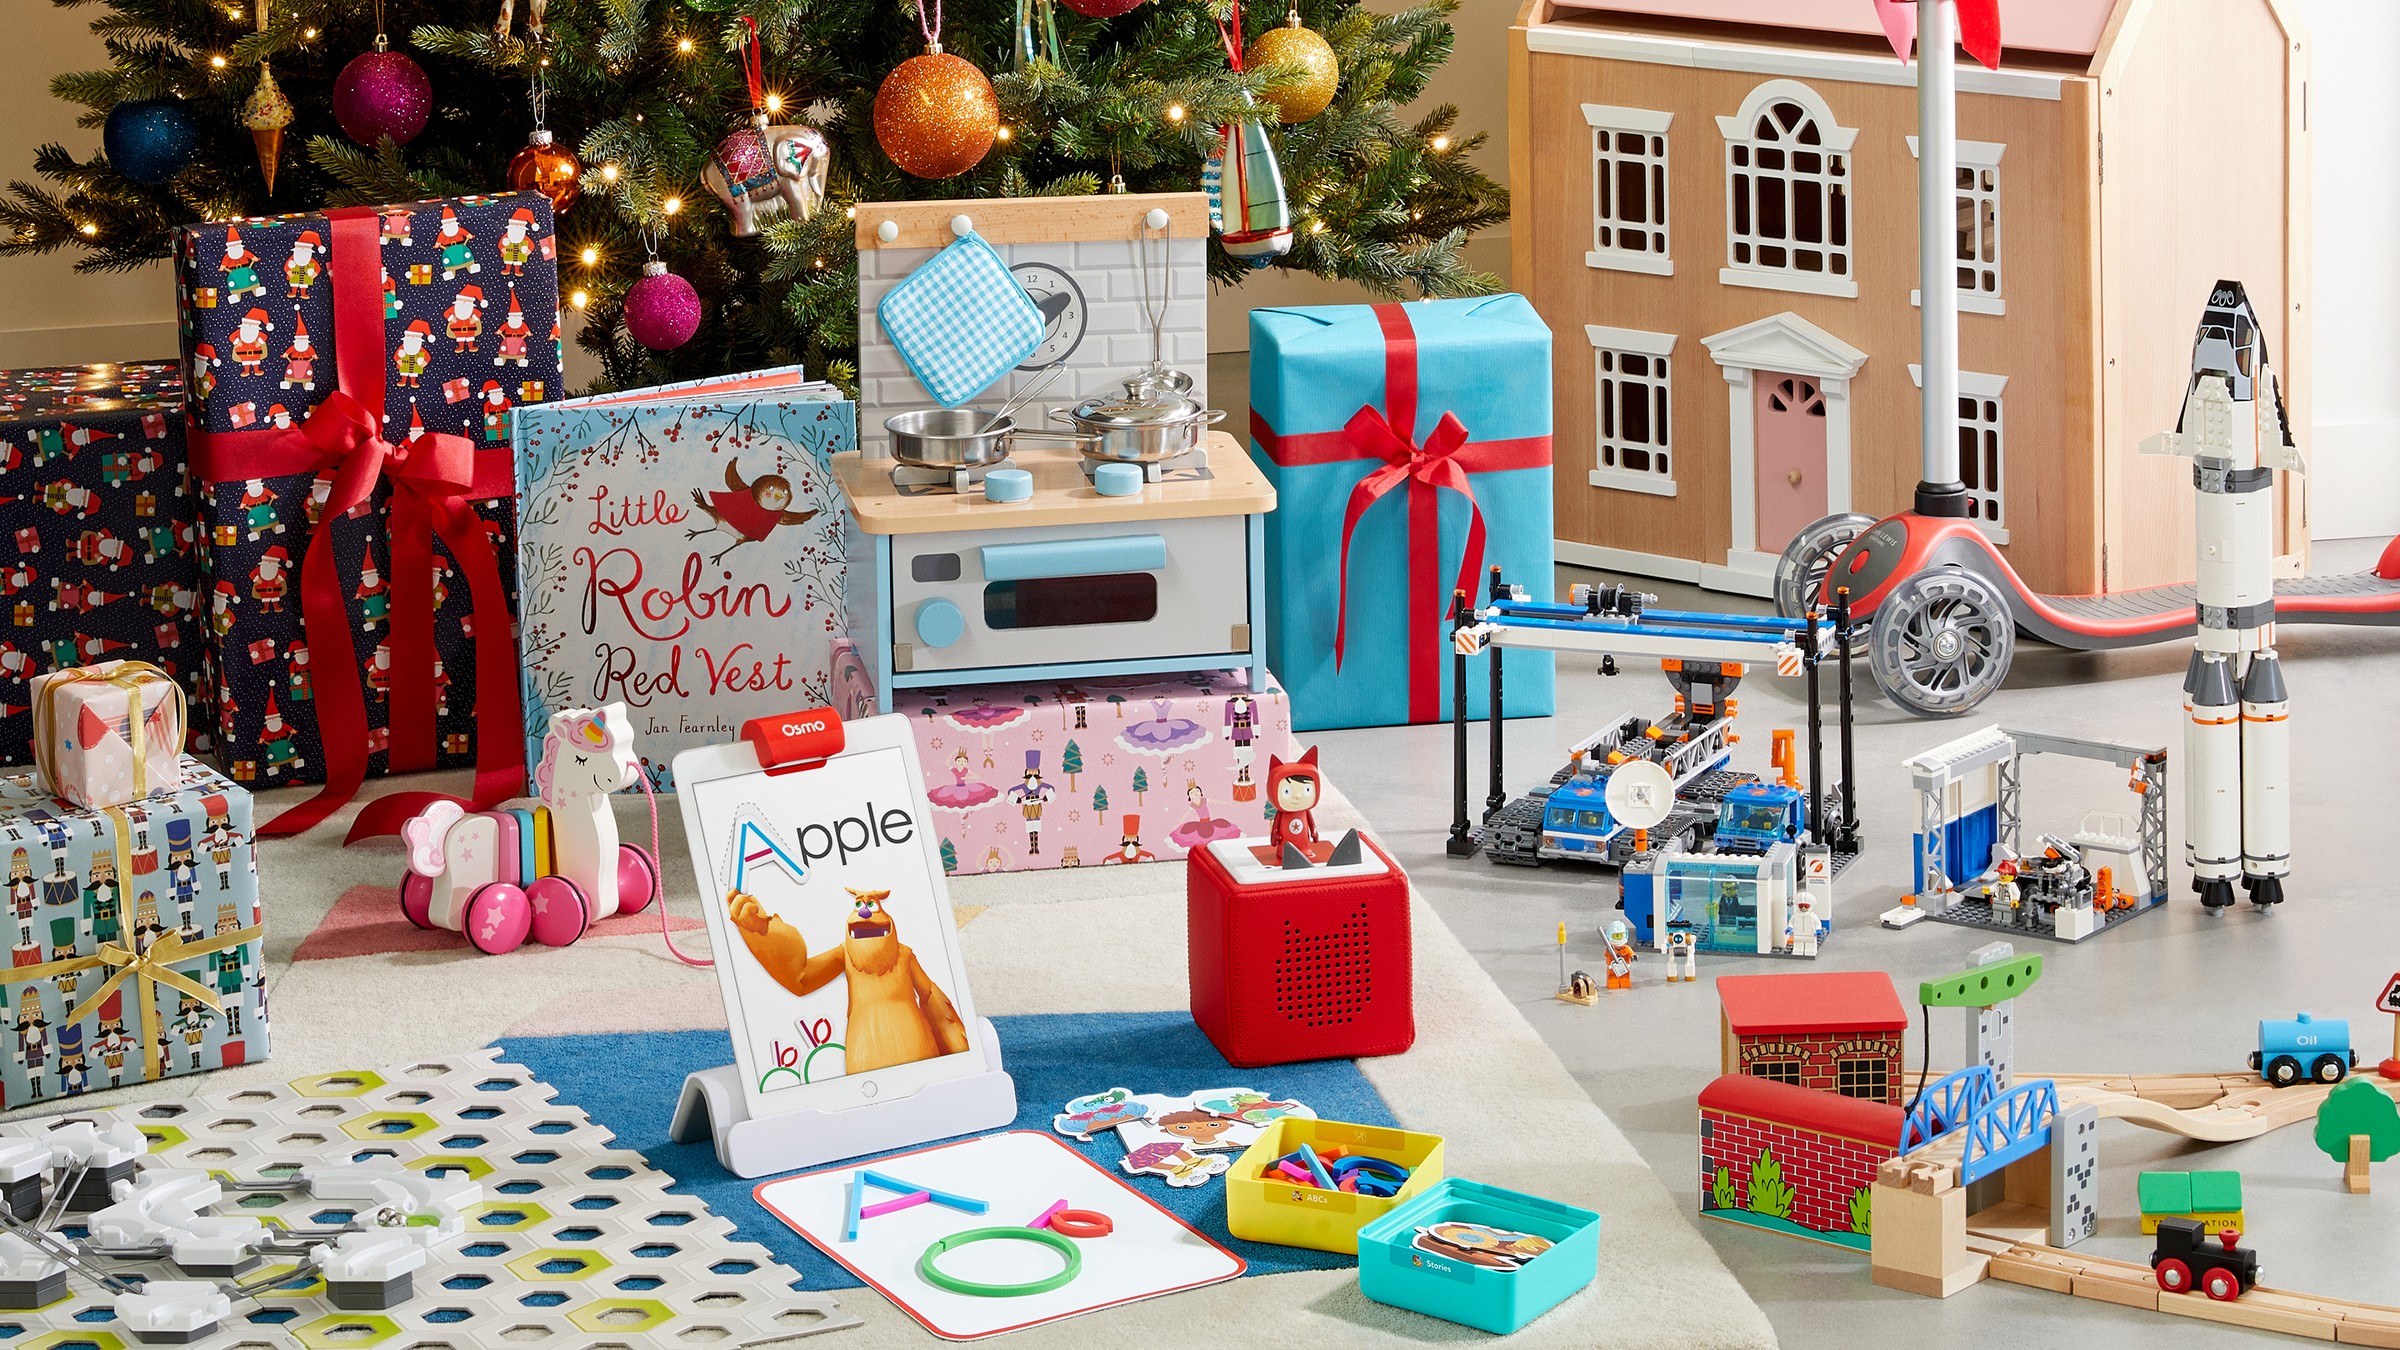 The top 10 toys of 2019 John Lewis & Partners